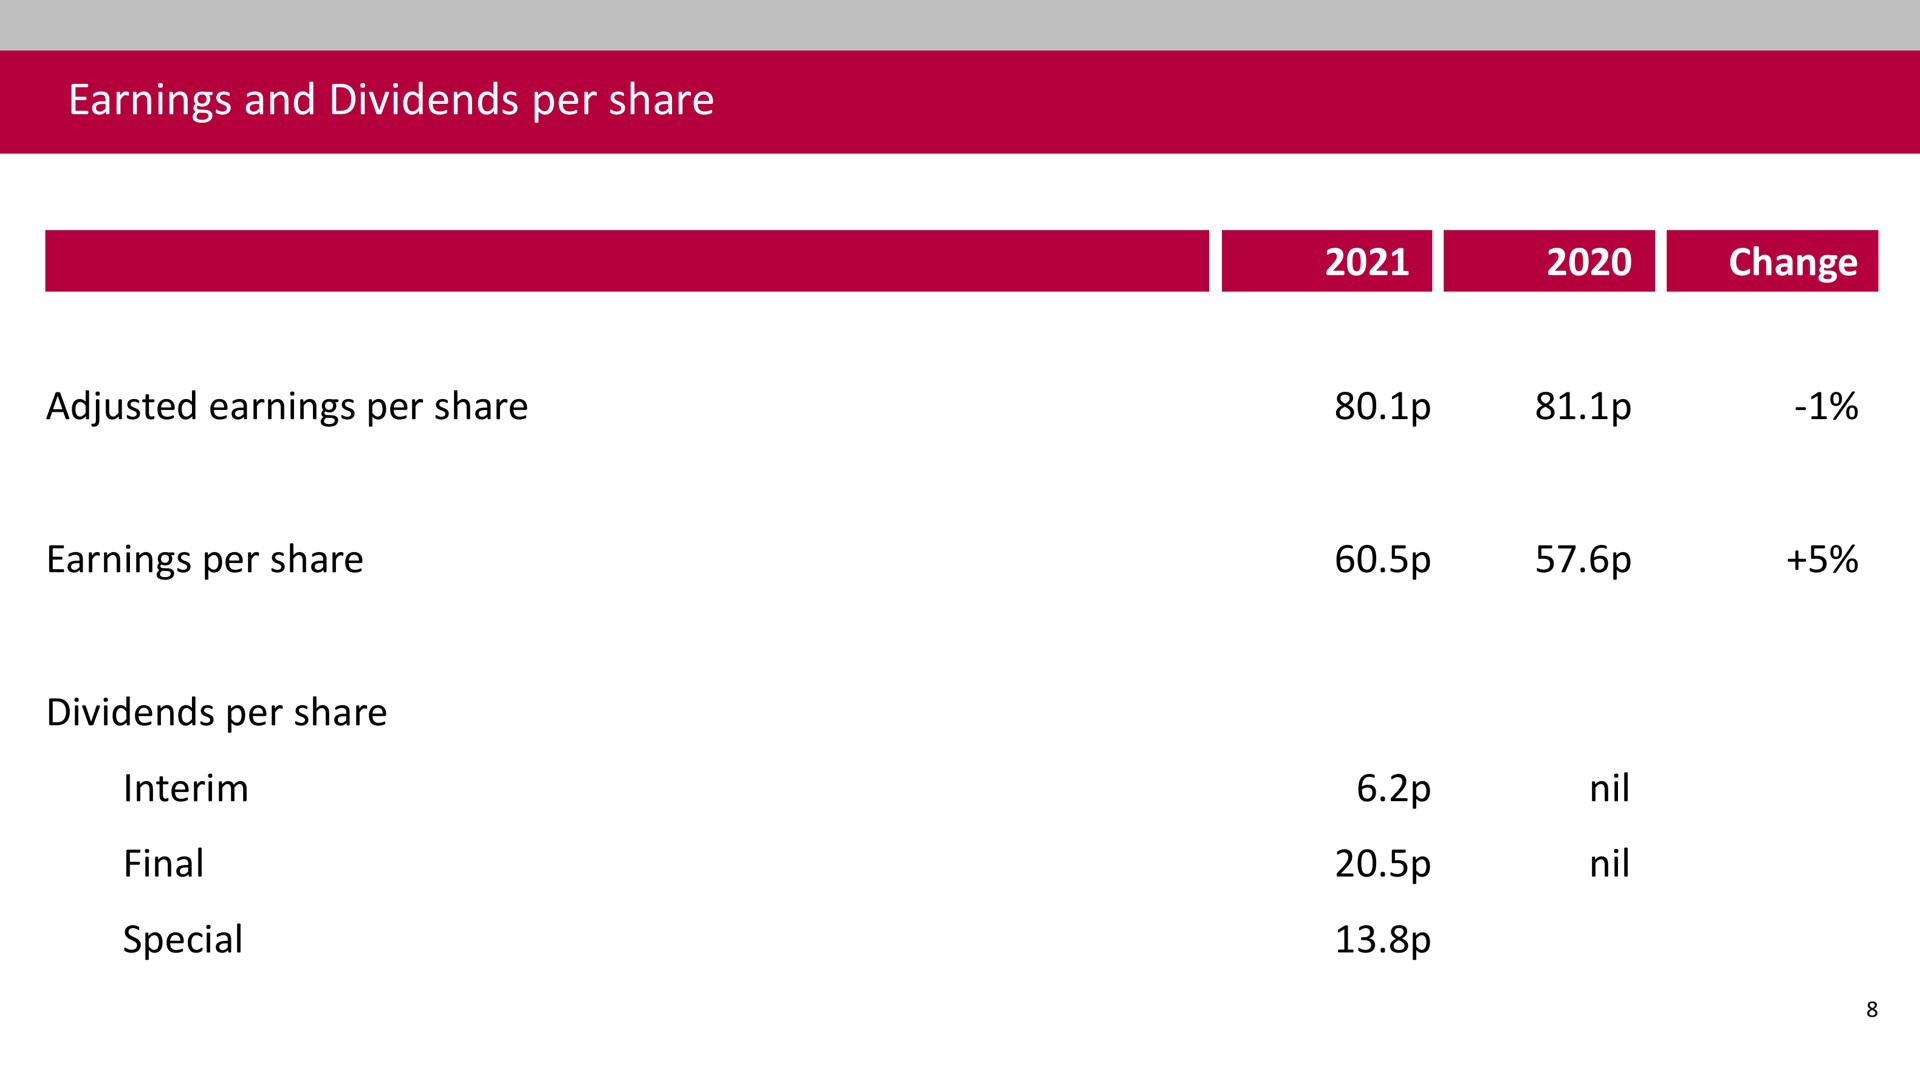 earnings and dividends per share | Associated British Foods